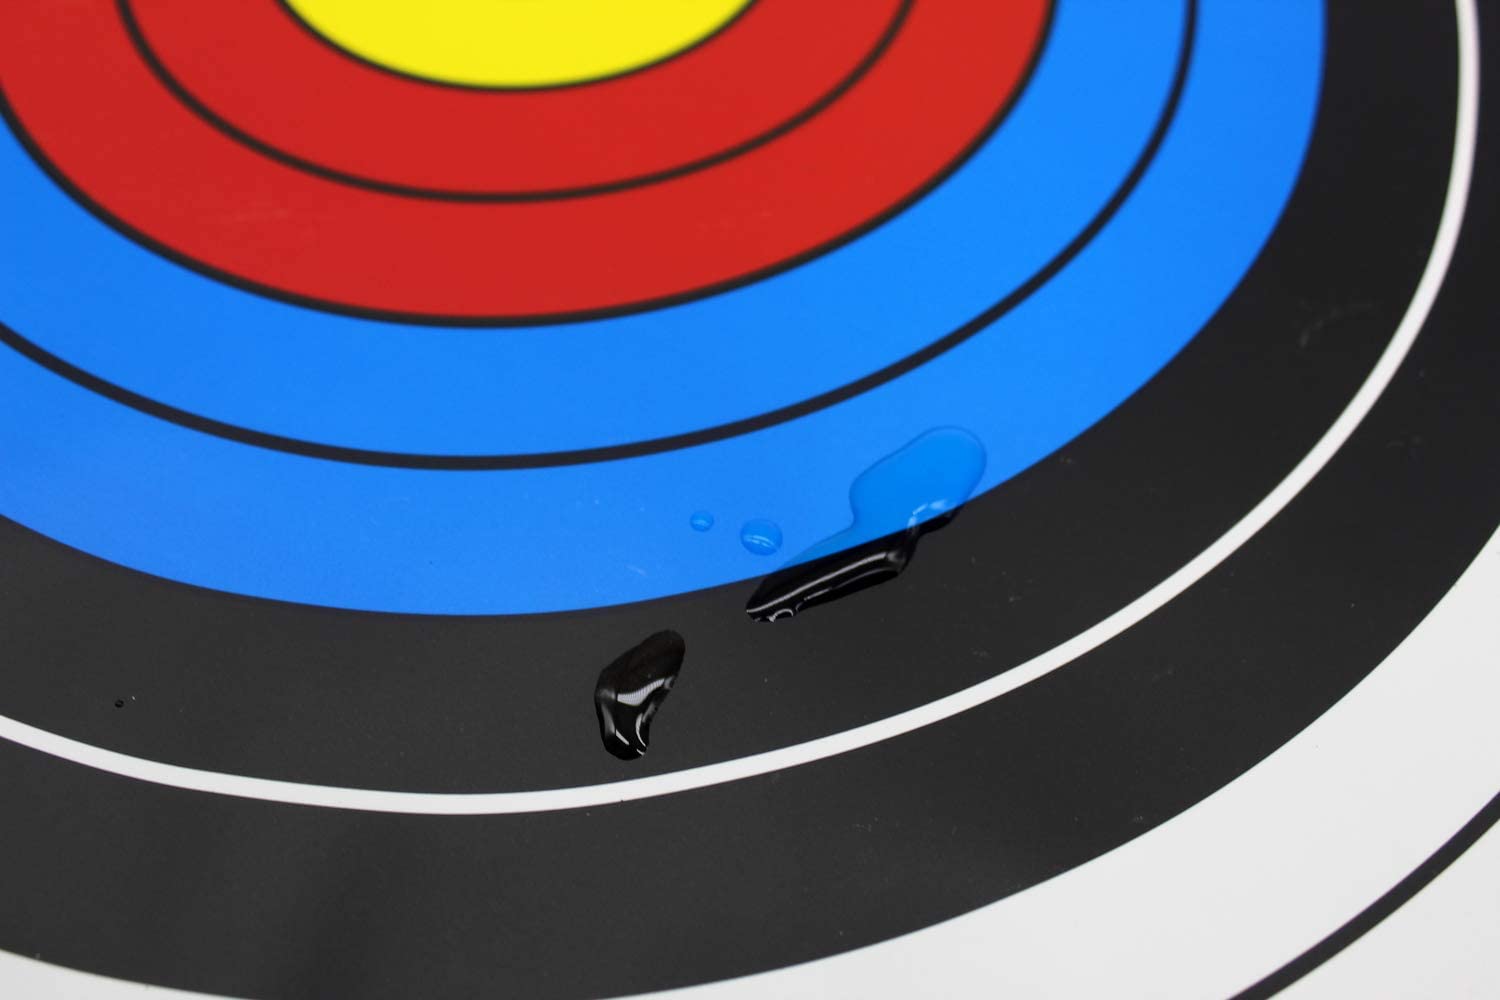 2x2 Ft. Economy Bow Target, Includes 2 Paper Targets and Push Pins